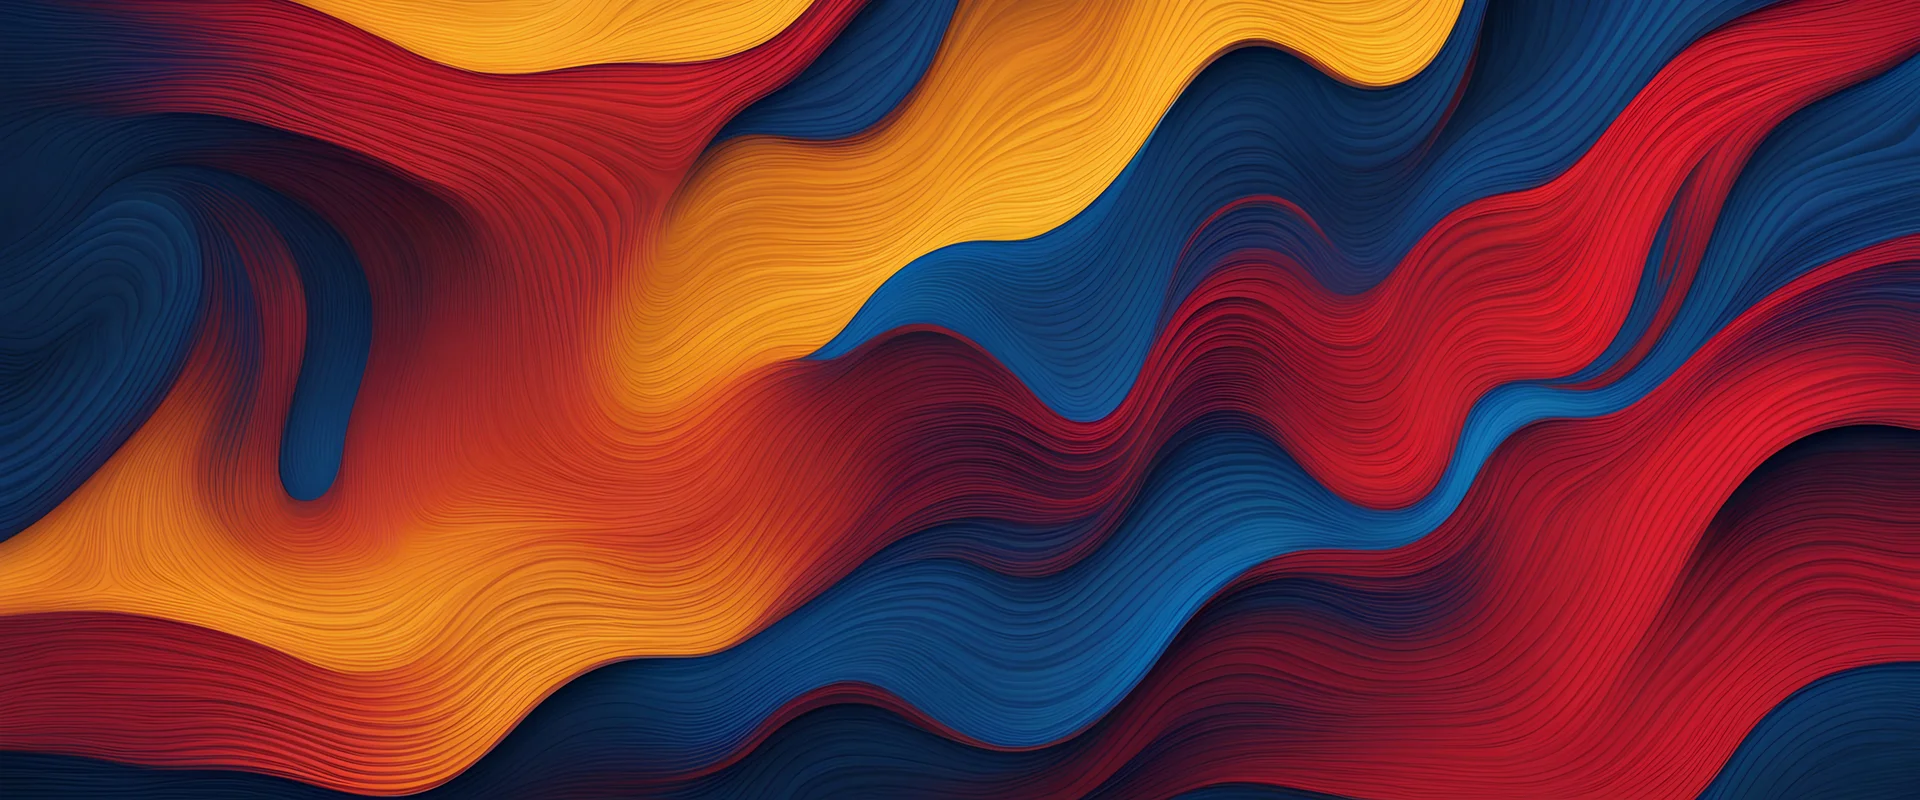 Abstract background yellow blue red color flow grainy wave dark noise texture cover header wallpaper design